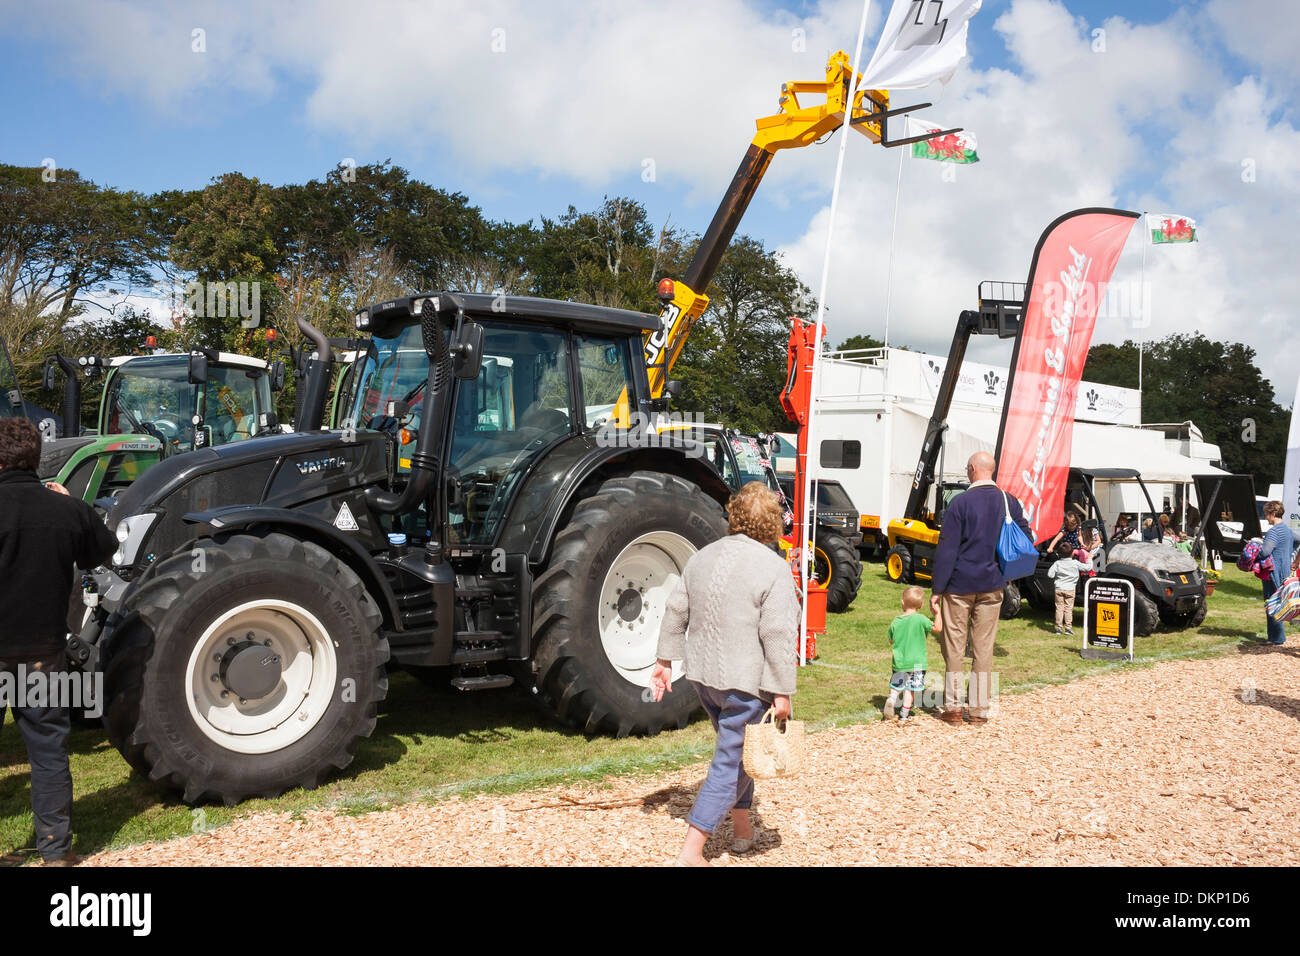 Agricultural show ground with tractors and machinery Stock Photo